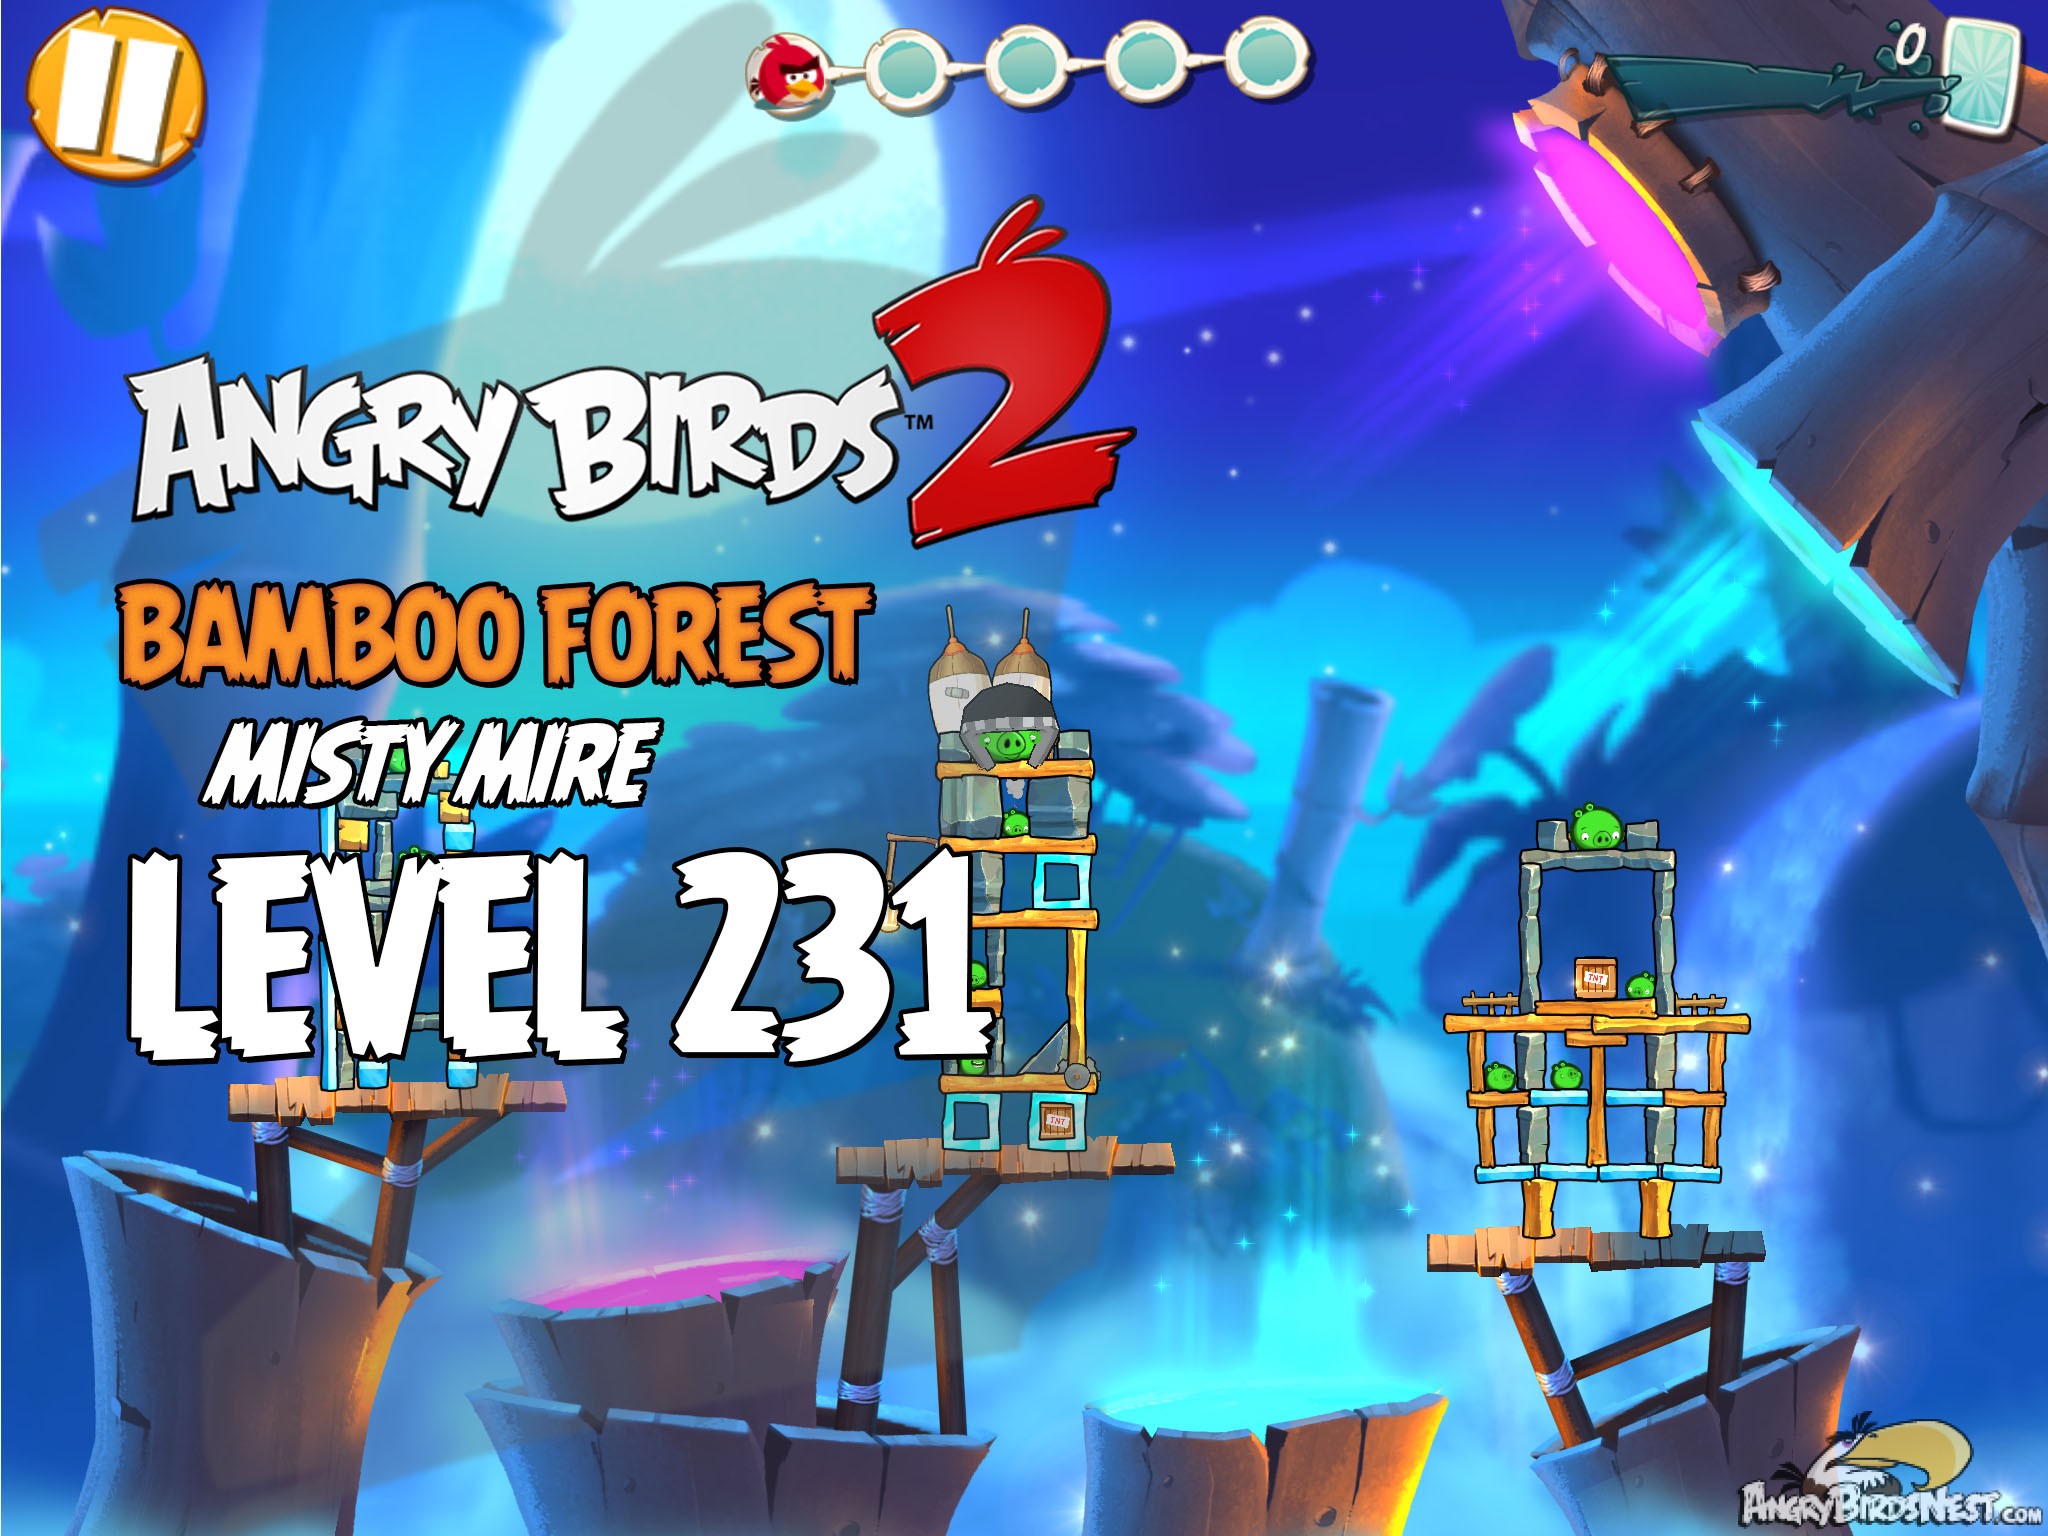 Angry Birds 2 Bamboo Forest Misty Mire Level 231